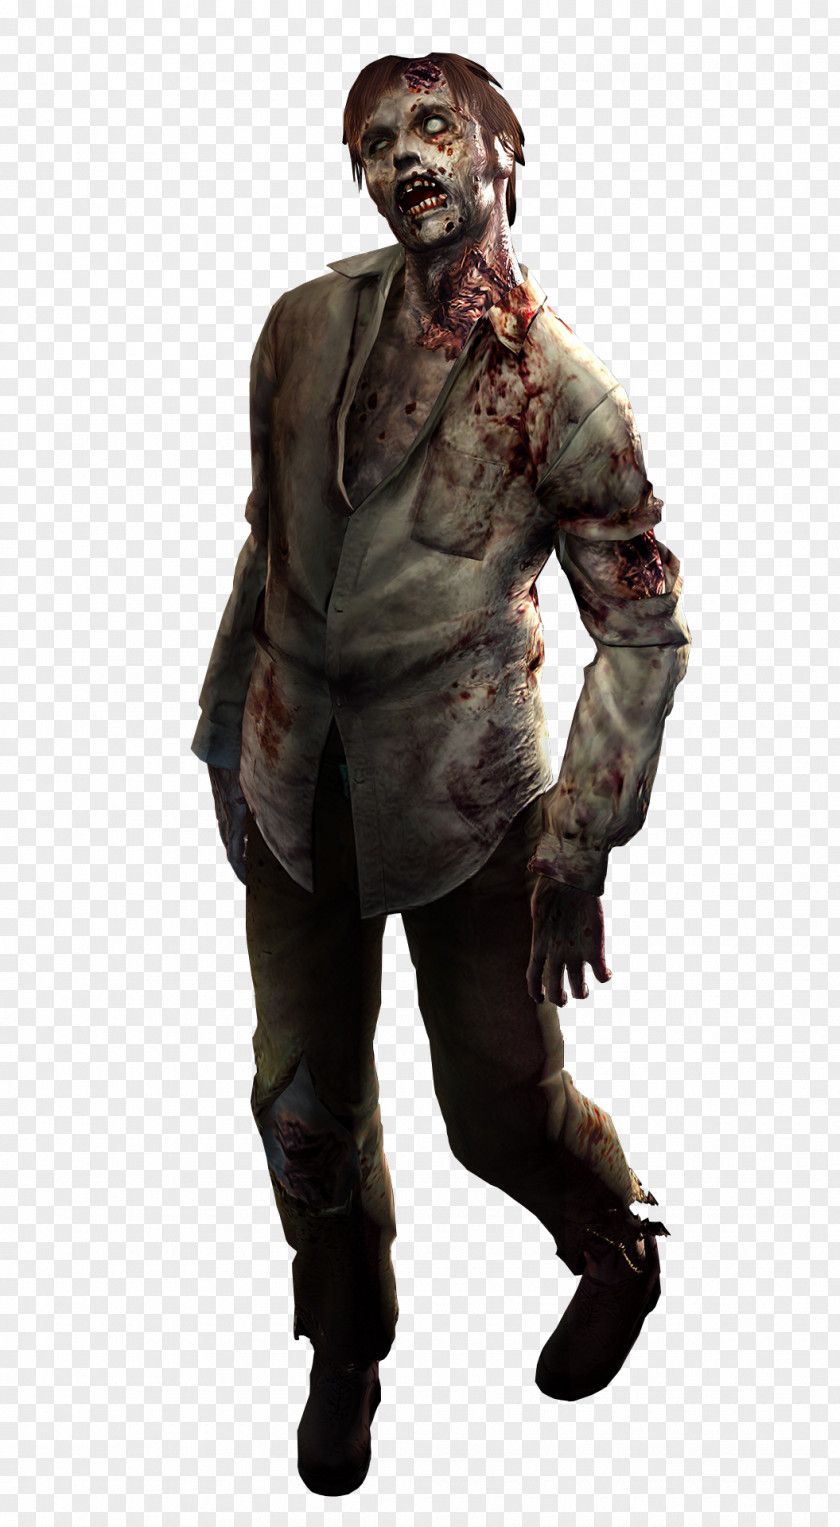 Resident Evil Dying Light Call Of Duty: Black Ops III Zombie PNG of Zombie, , The Walking Dead zombie character clipart PNG